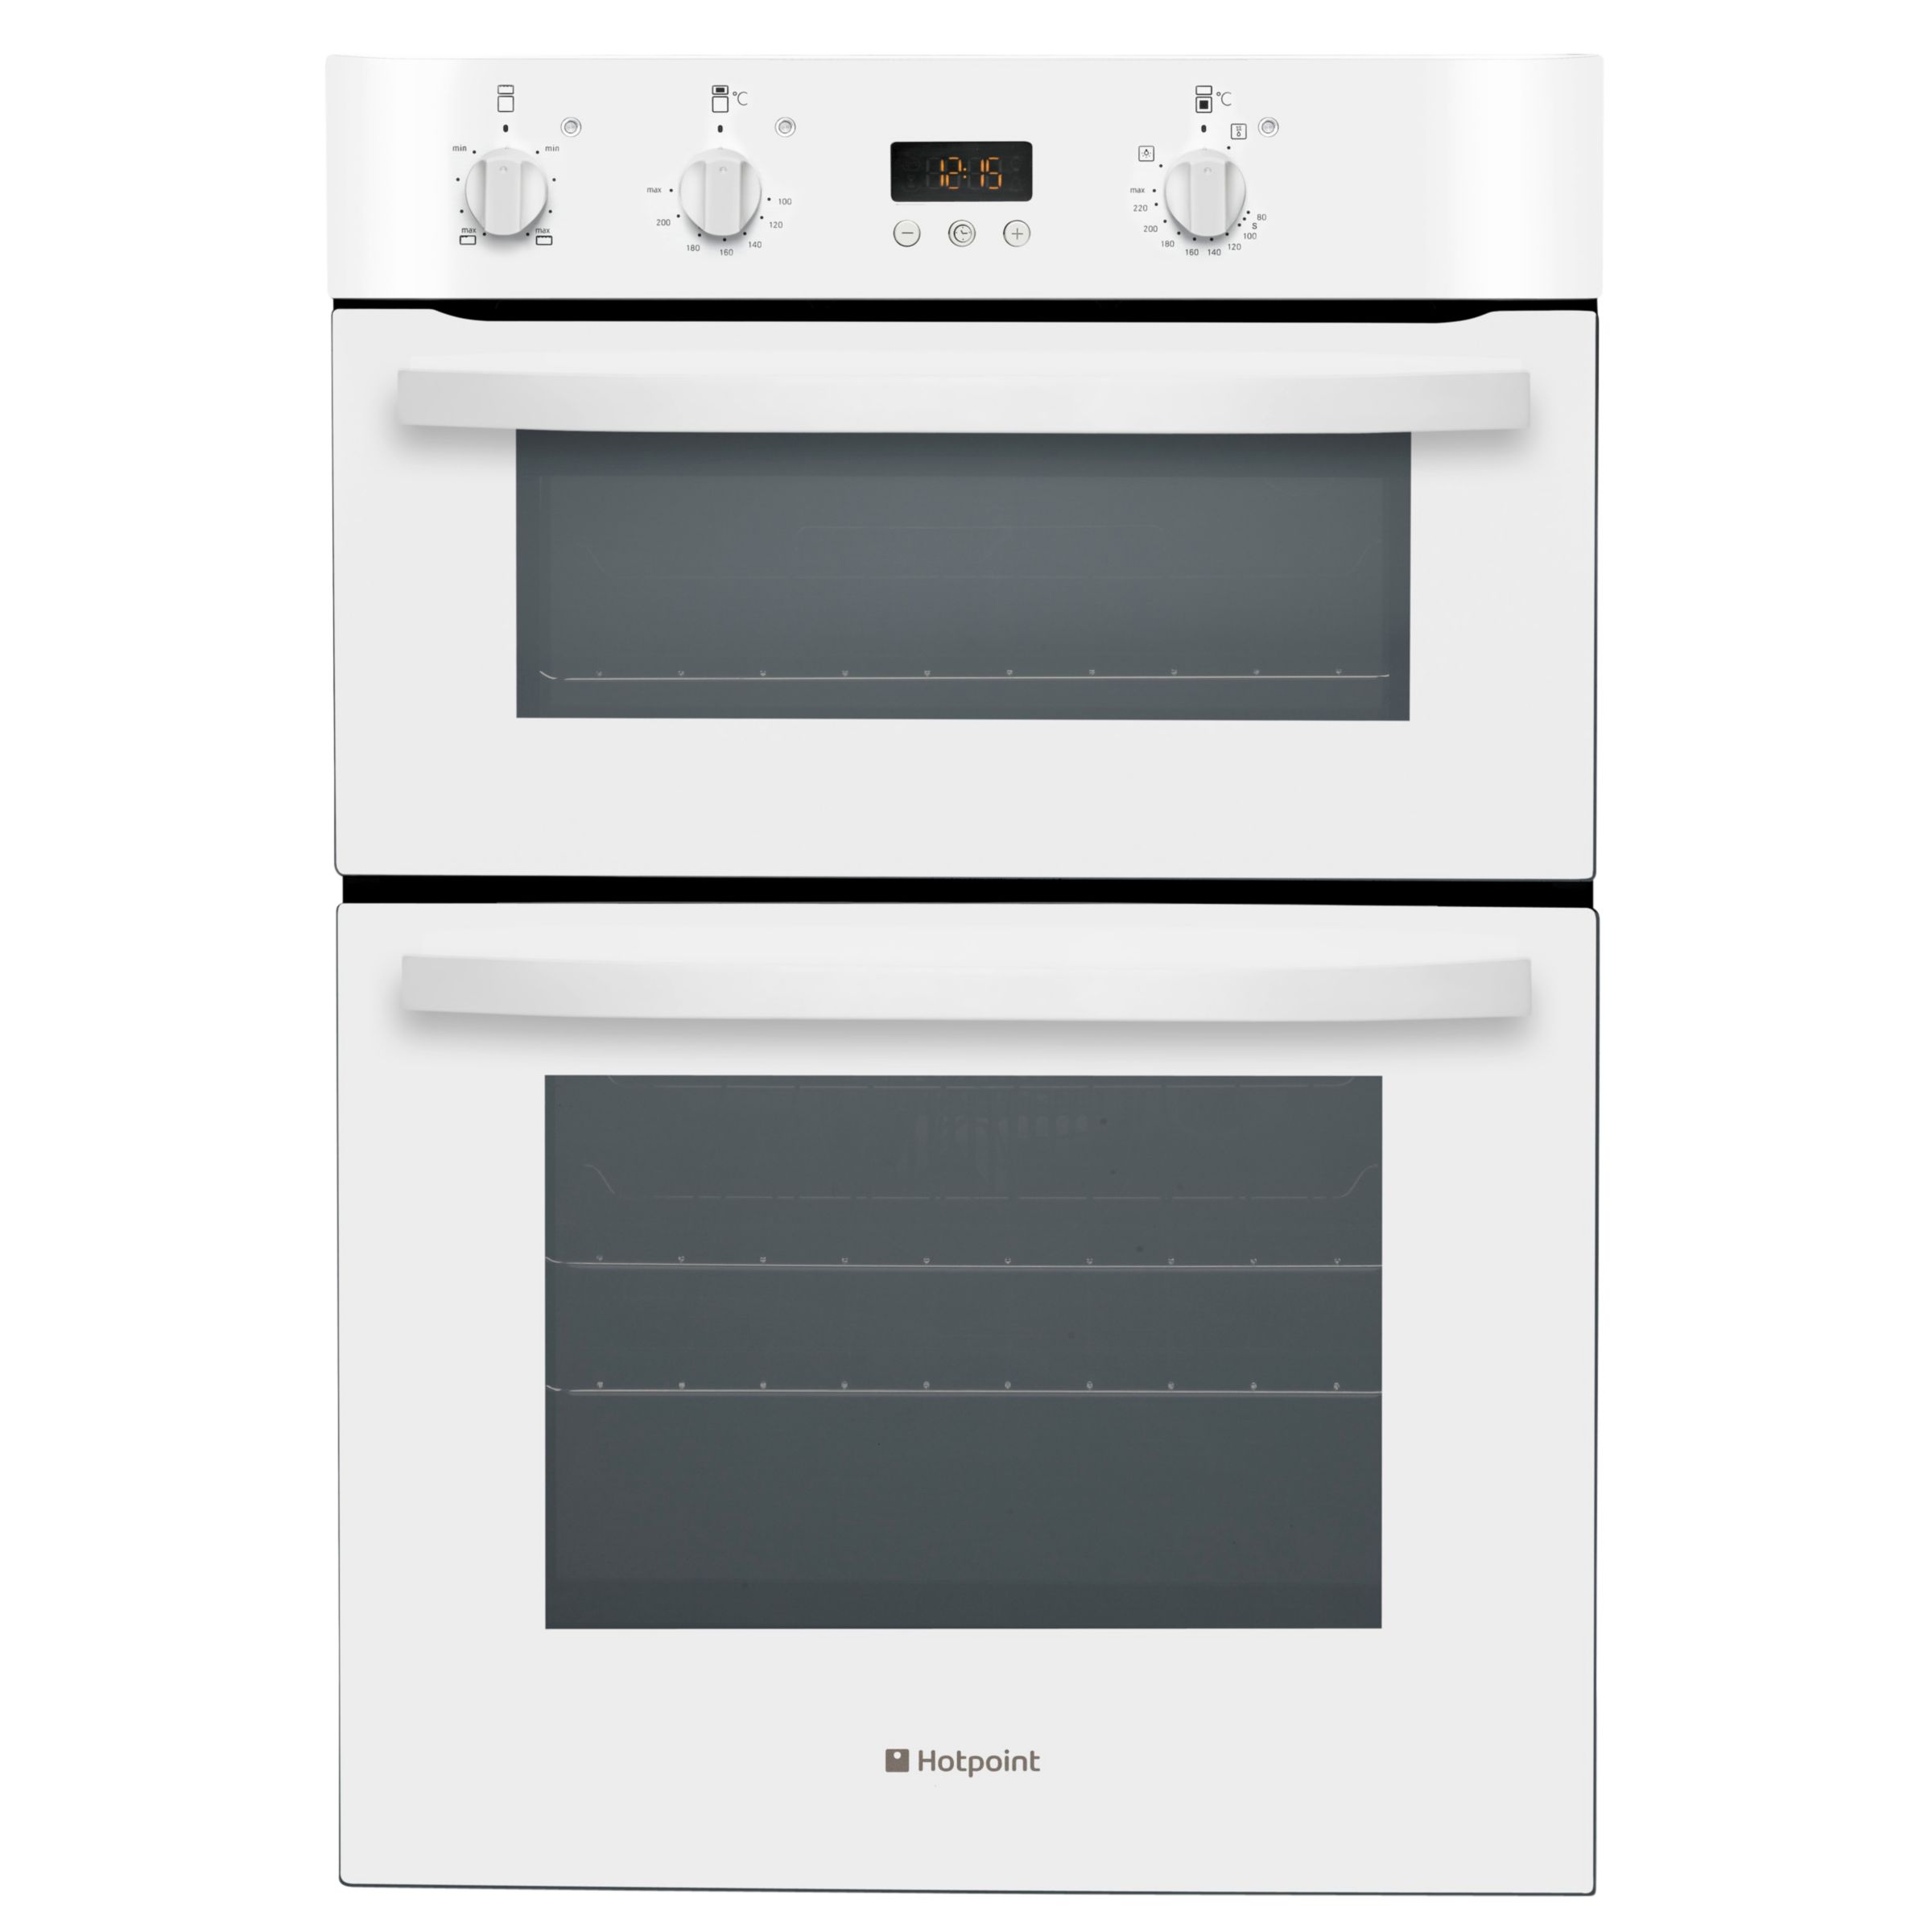 Hotpoint DH53W Double Electric Oven, White at John Lewis